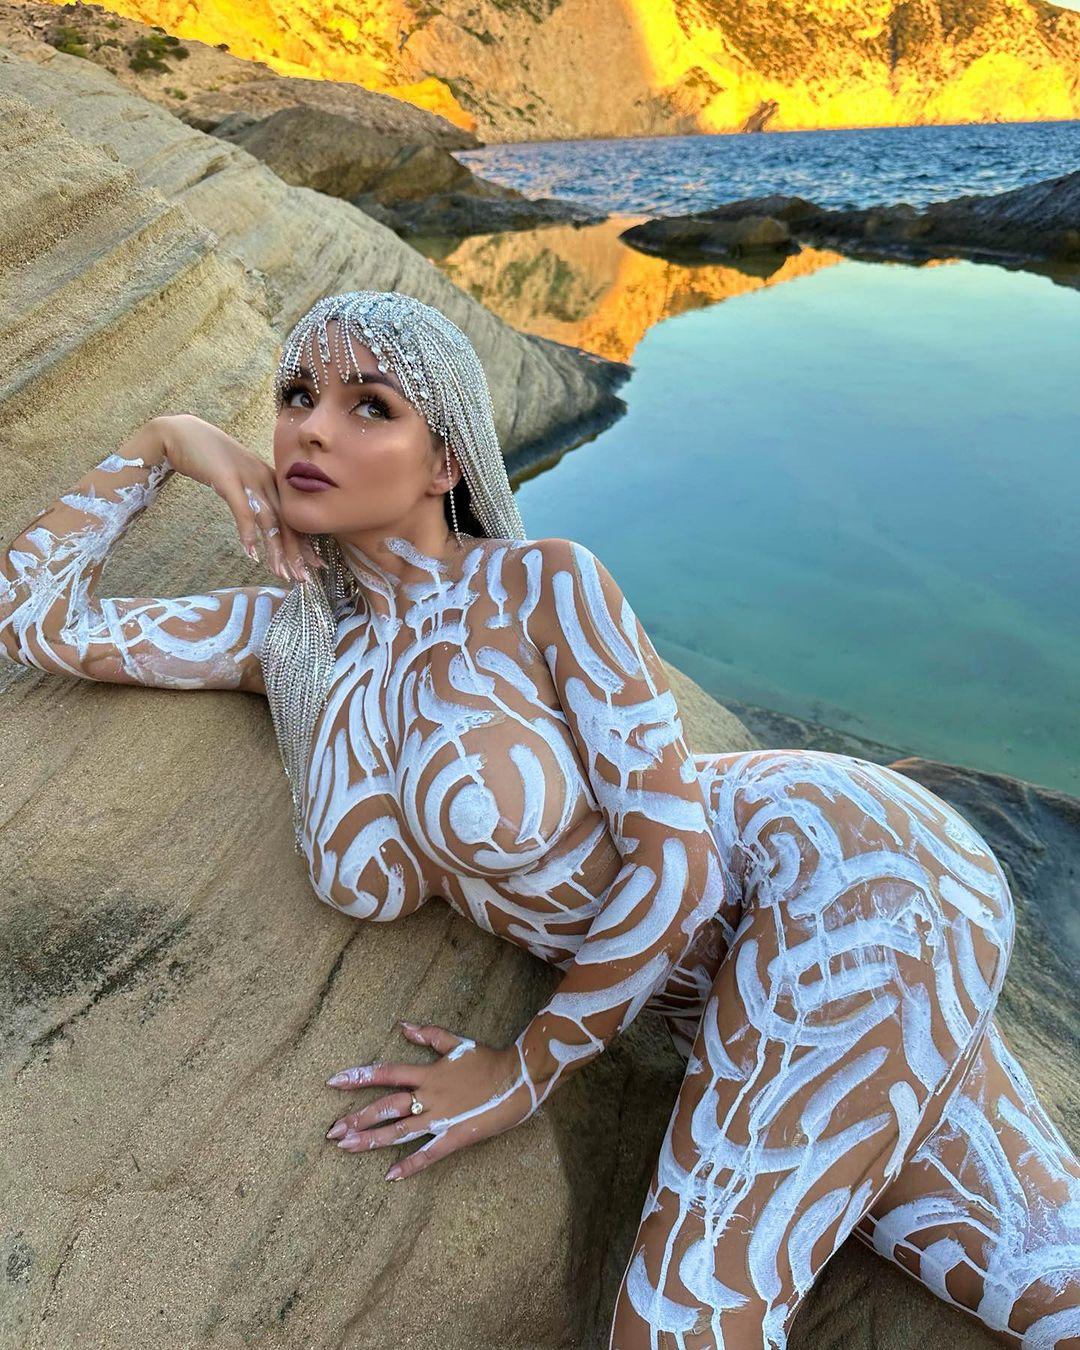 Demi Rose poses for the camera in nothing but white body paint.